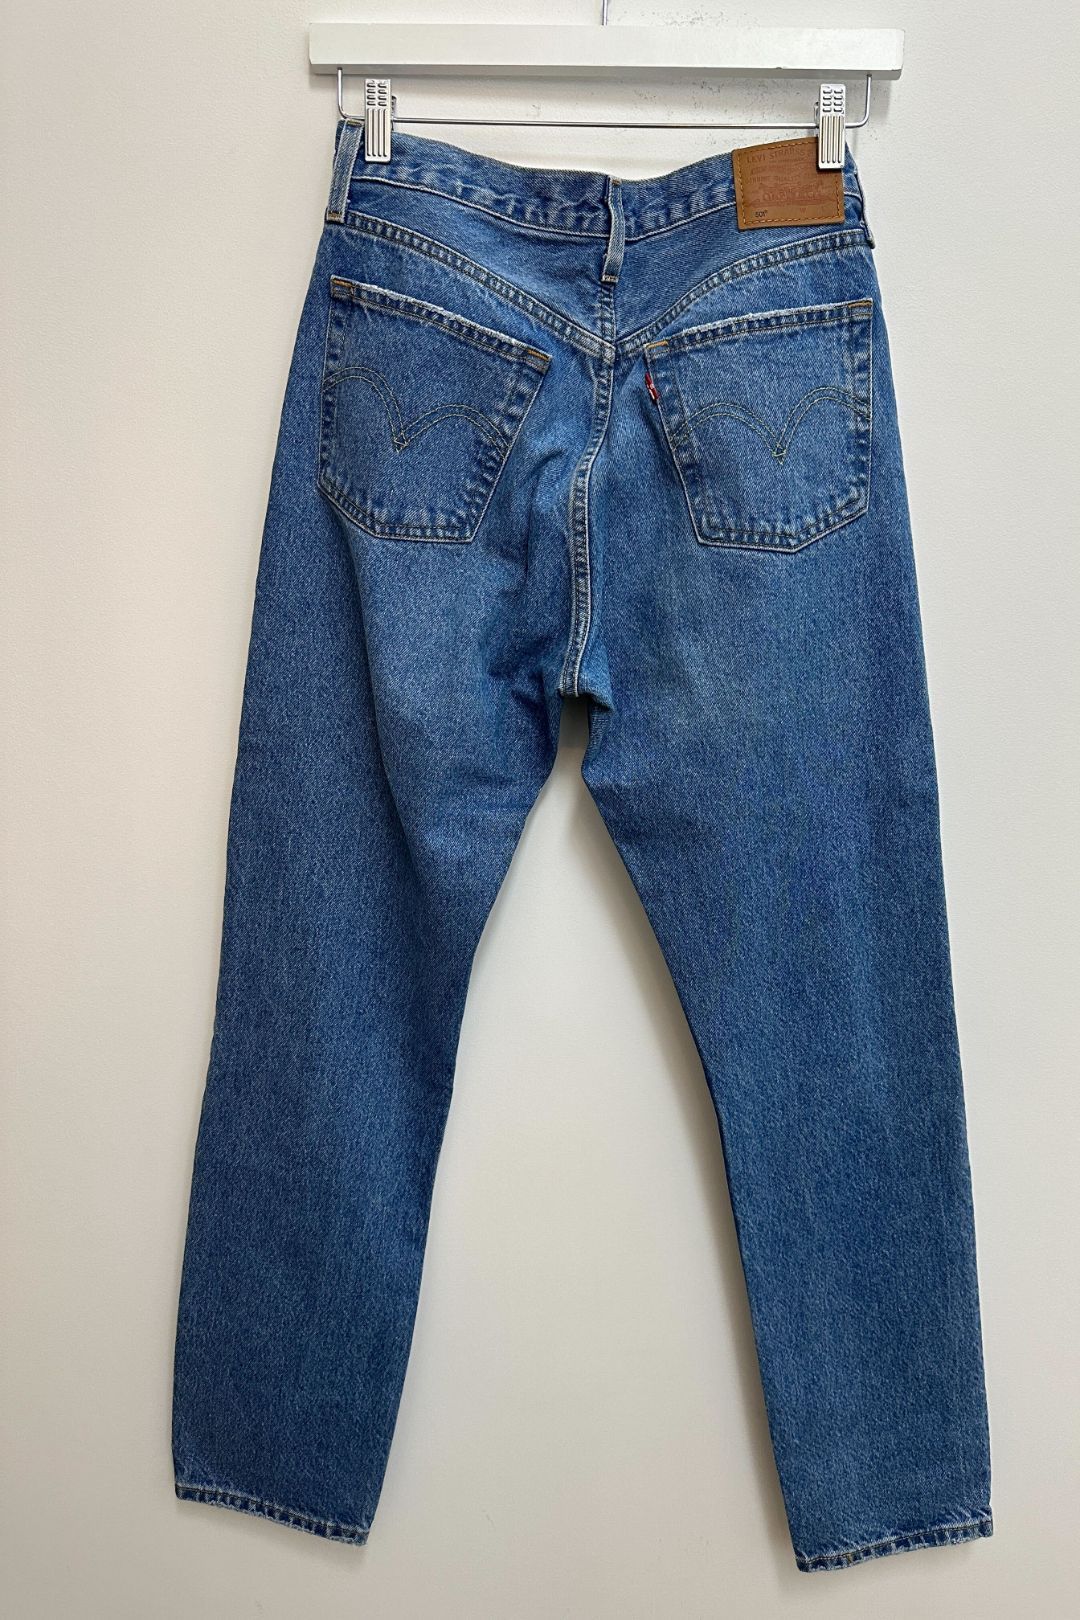 Levis 501 Jeans in Mid Blue